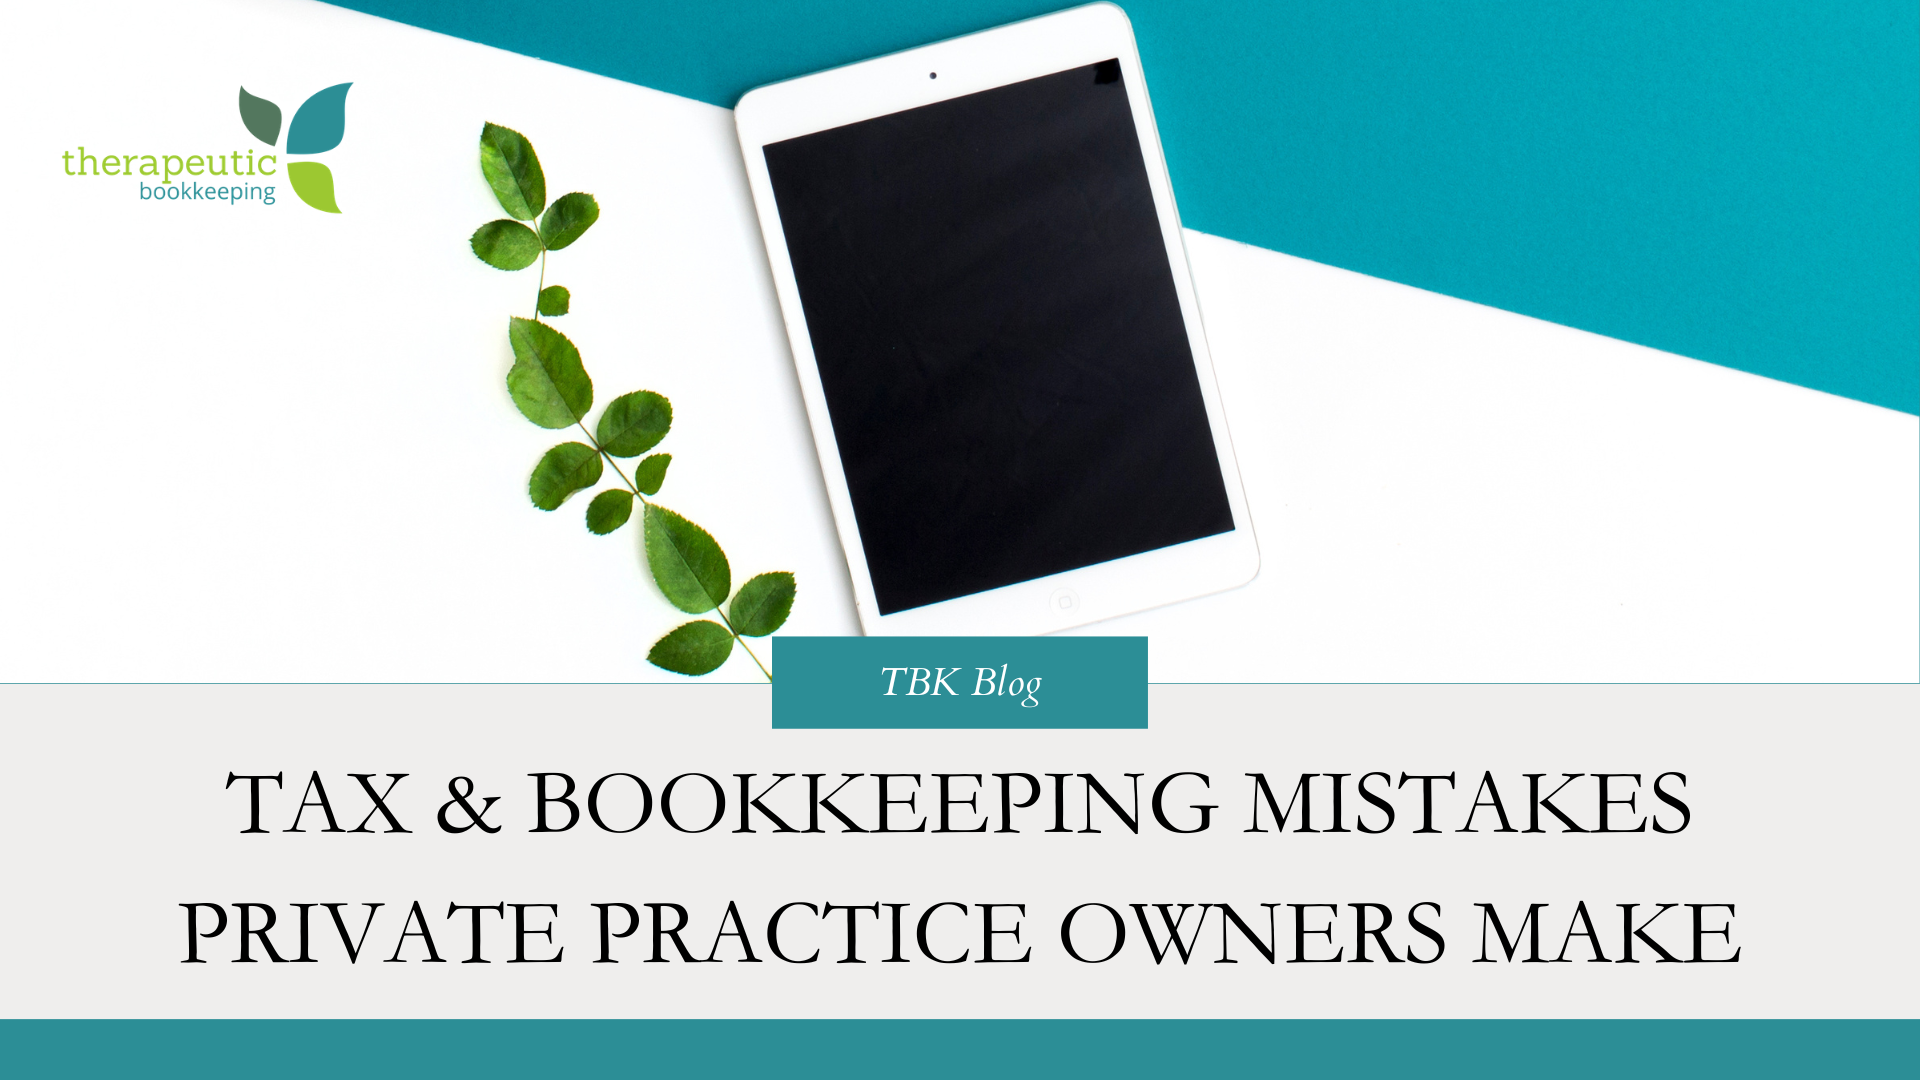 Tax & Bookkeeping Mistakes Private Practice Owners Make